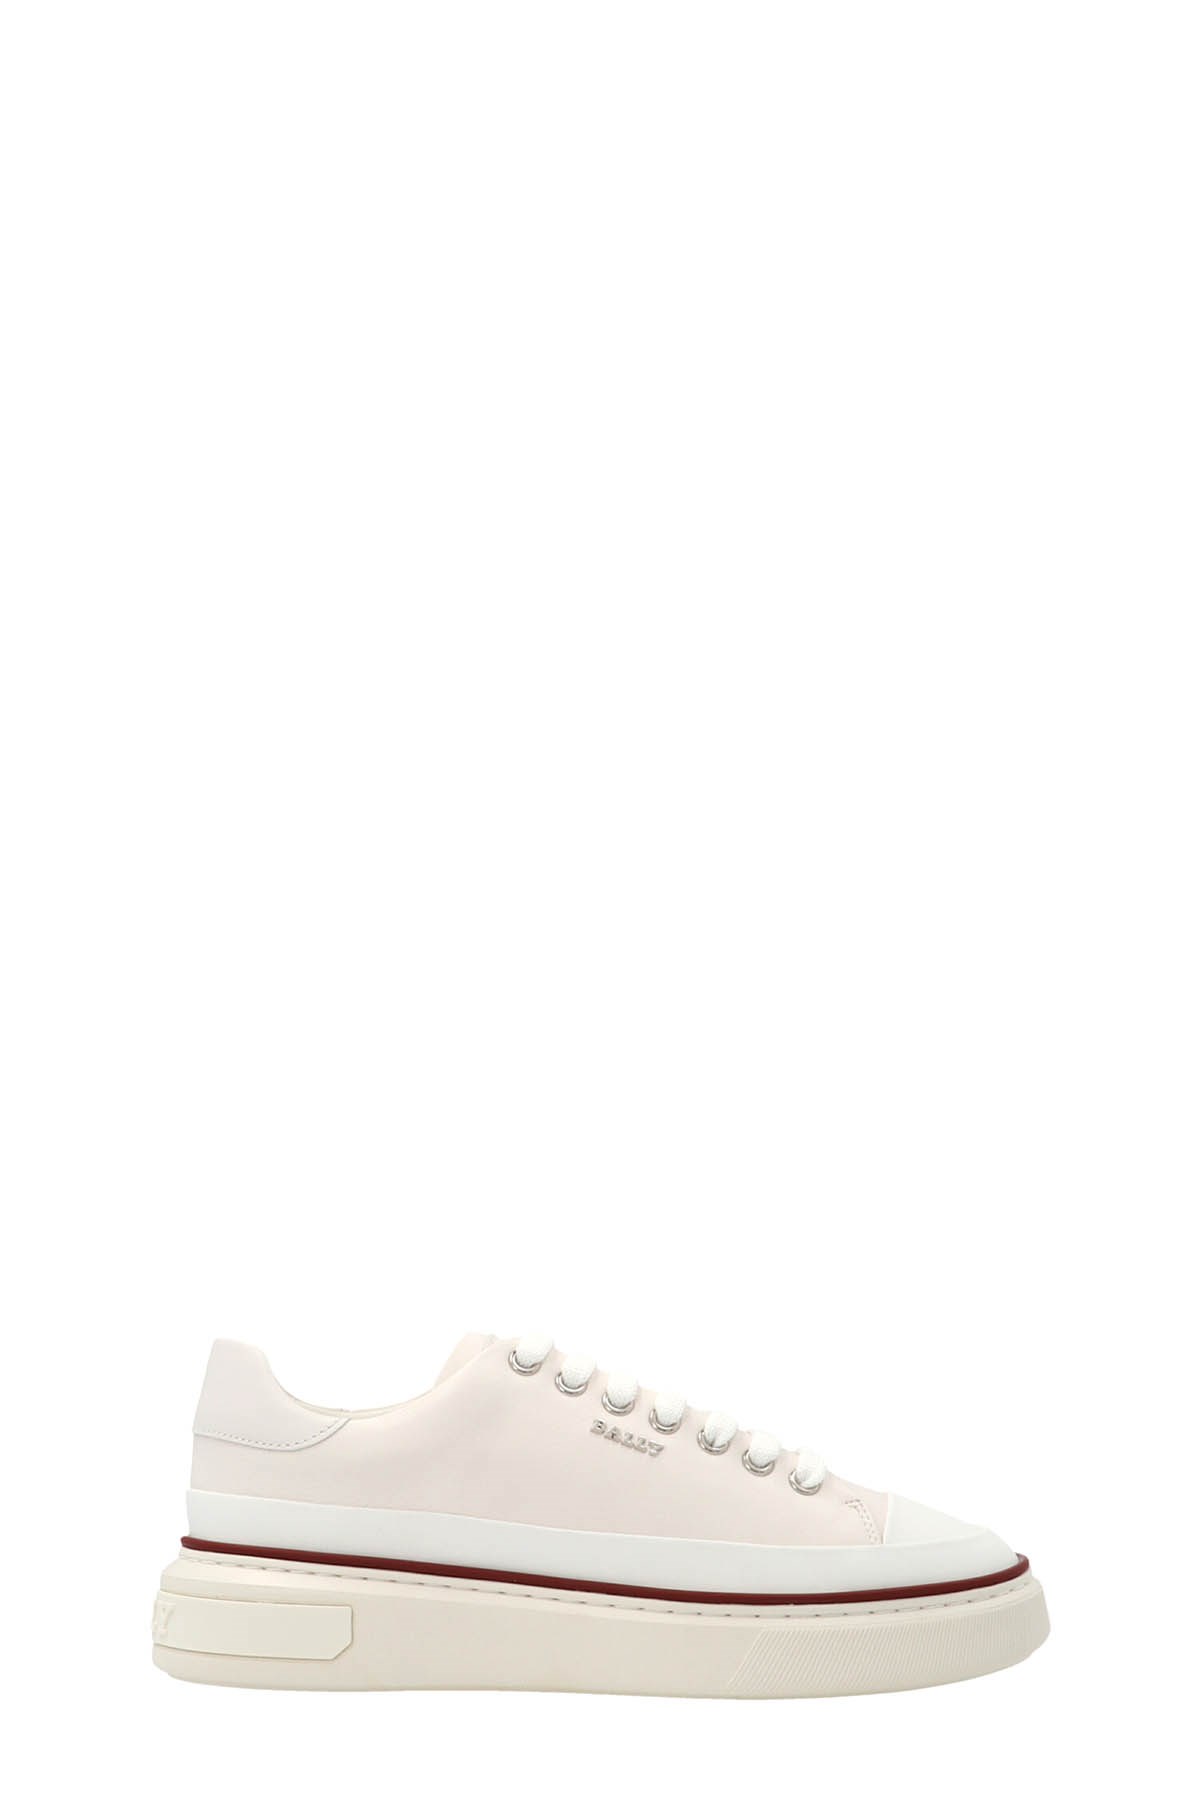 BALLY Sneakers 'Maily'